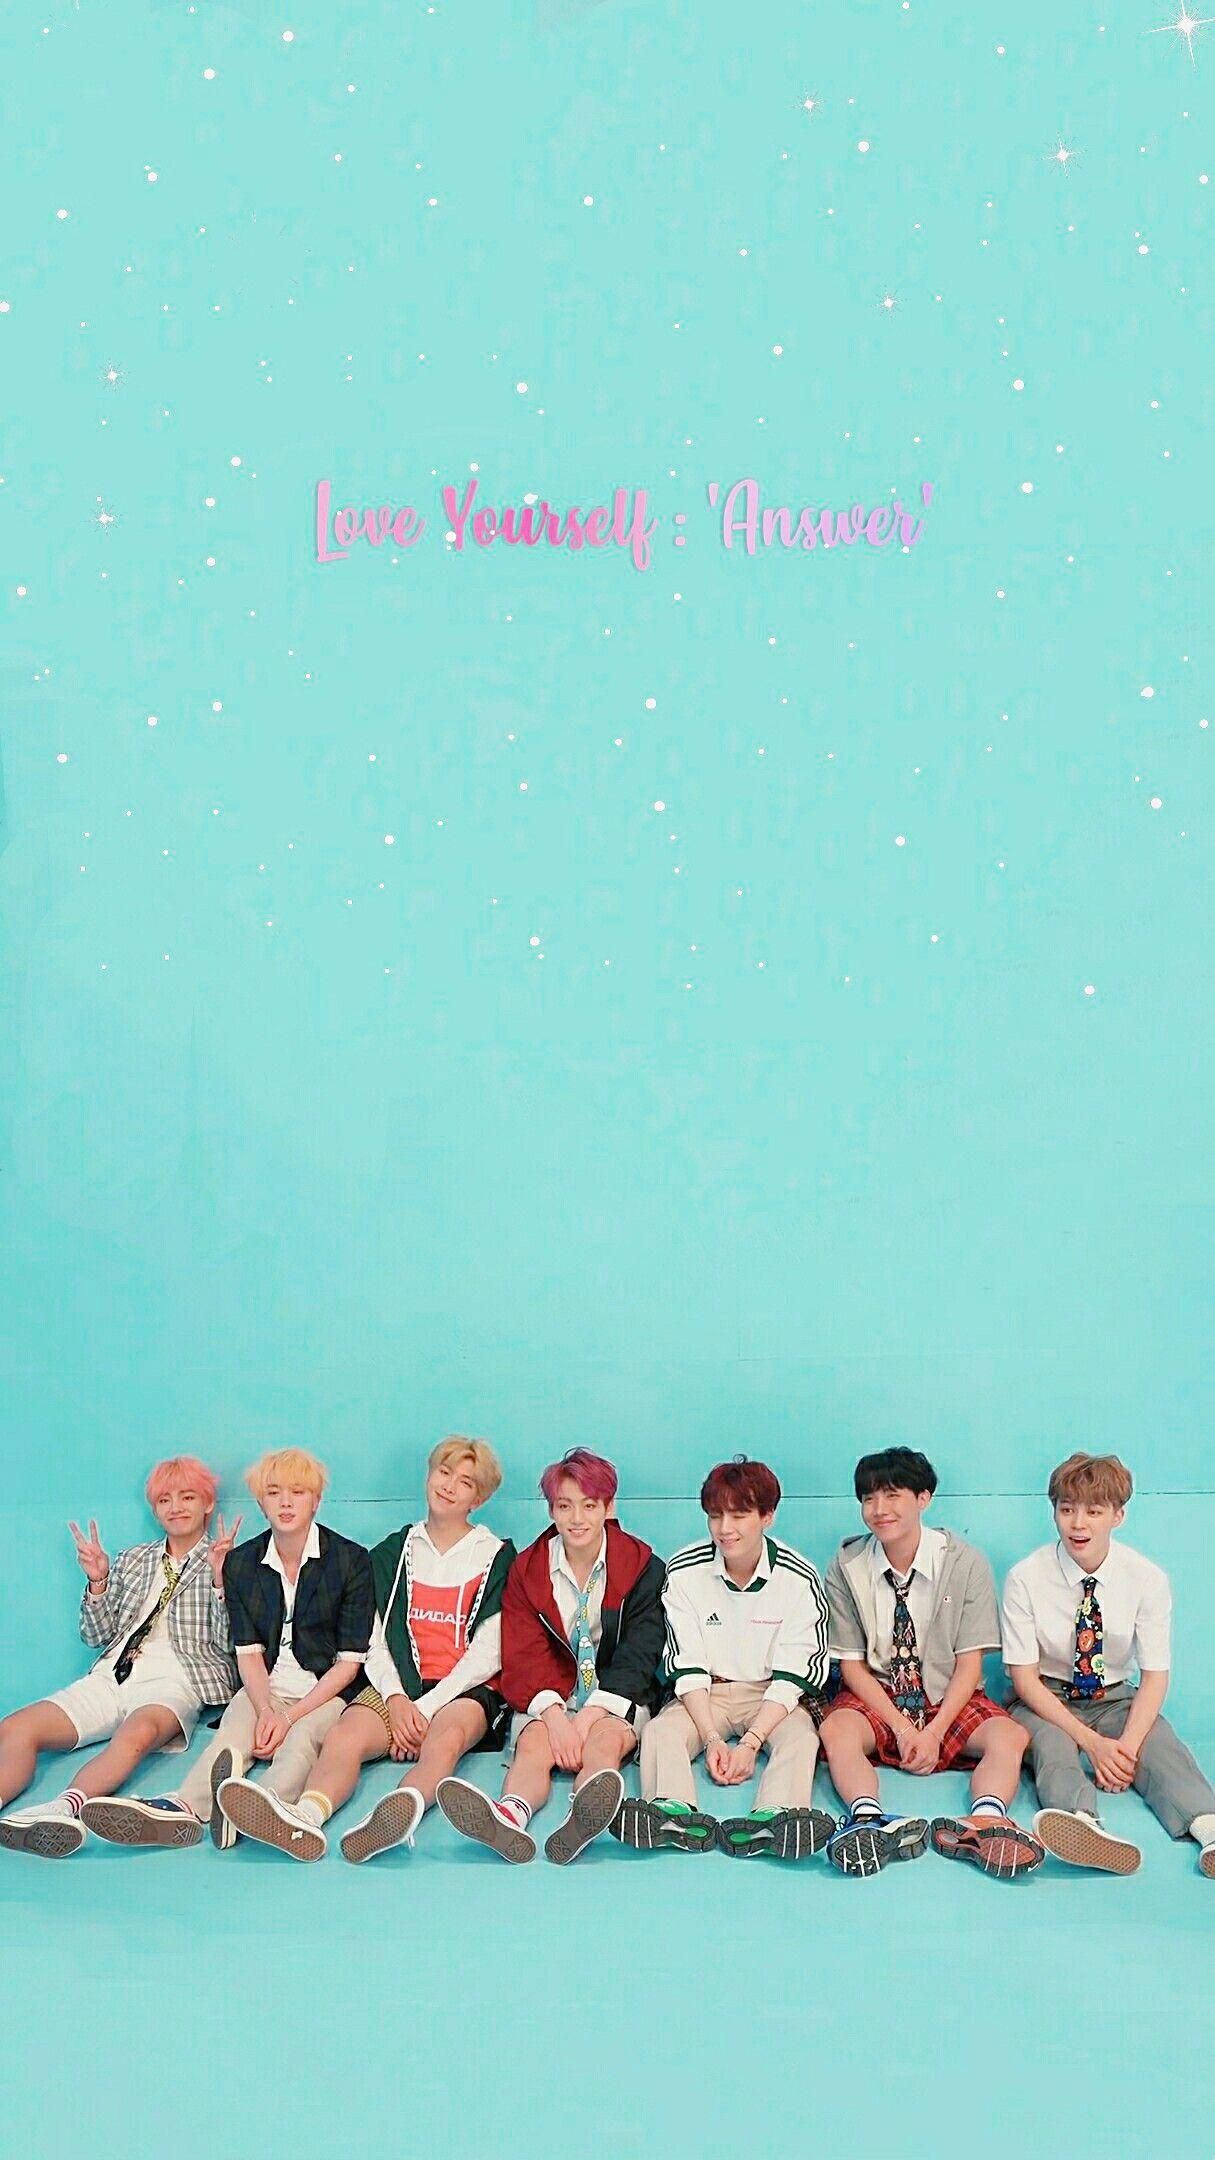 BTS EDITS. BTS WALLPAPERS. BTS LOVE YOURSELF 'Answer' Jacket